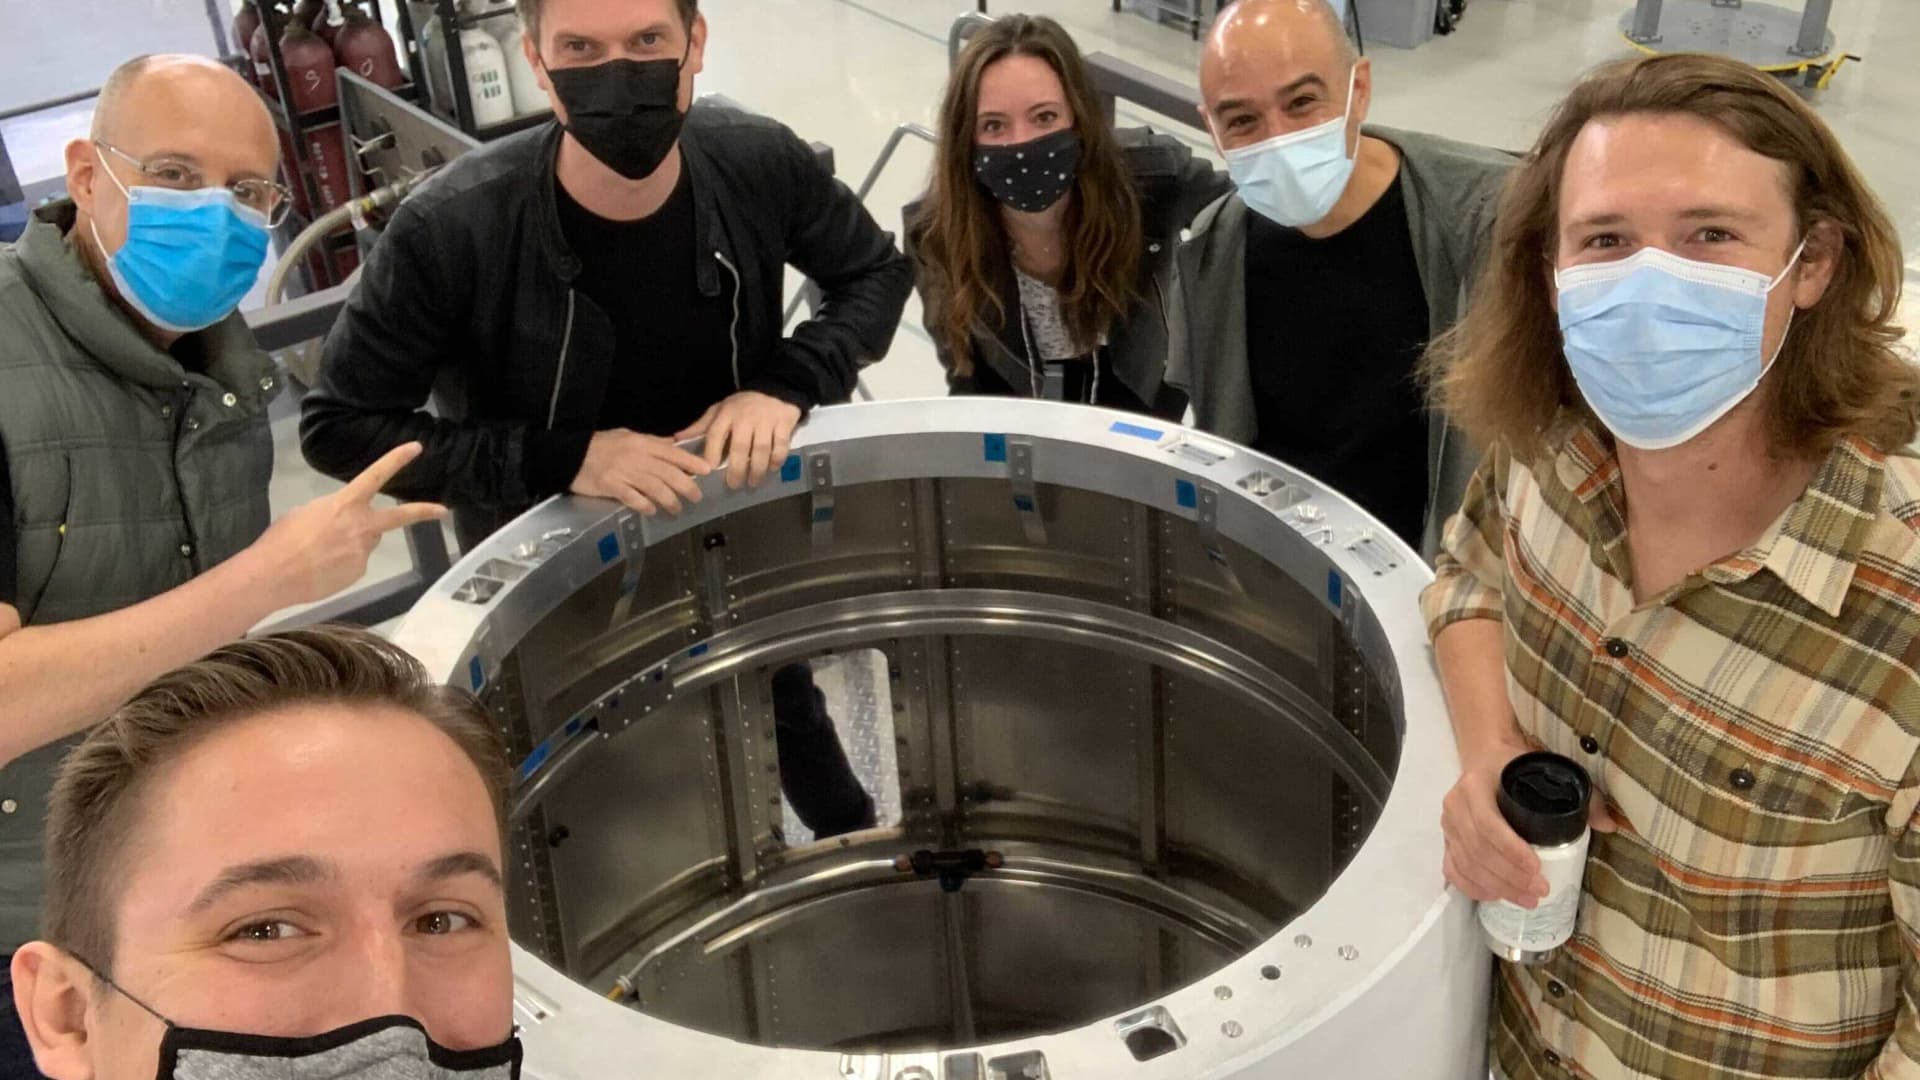 Members of Astra's leadership team gatherered around a rocket interstage in production, from right: VP of manufacturing Bryson Gentile, SVP of factory engineering Dr. Pablo Gonzalez, VP of communications Kati Dahm, founder and CEO Chris Kemp, EVP of engineering Benjamin Lyon.